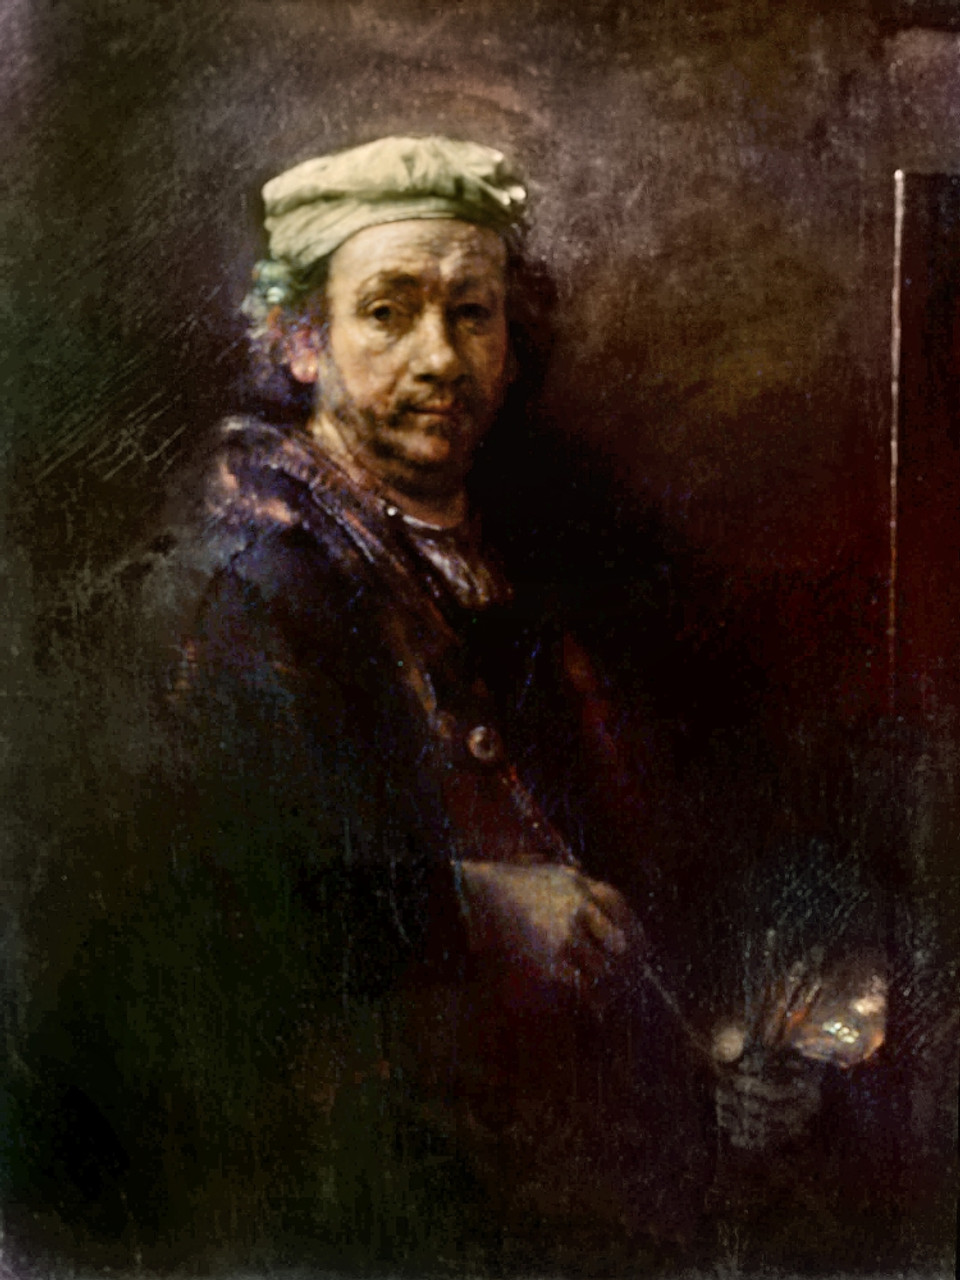 Rijn, Posterazzi Item His Easel. Oil Self-Portrait. At Van Print 1660. VARGRC0054419 # Collection Rembrandt by On By Rembrandt: - Poster Granger - Canvas /Nself-Portrait